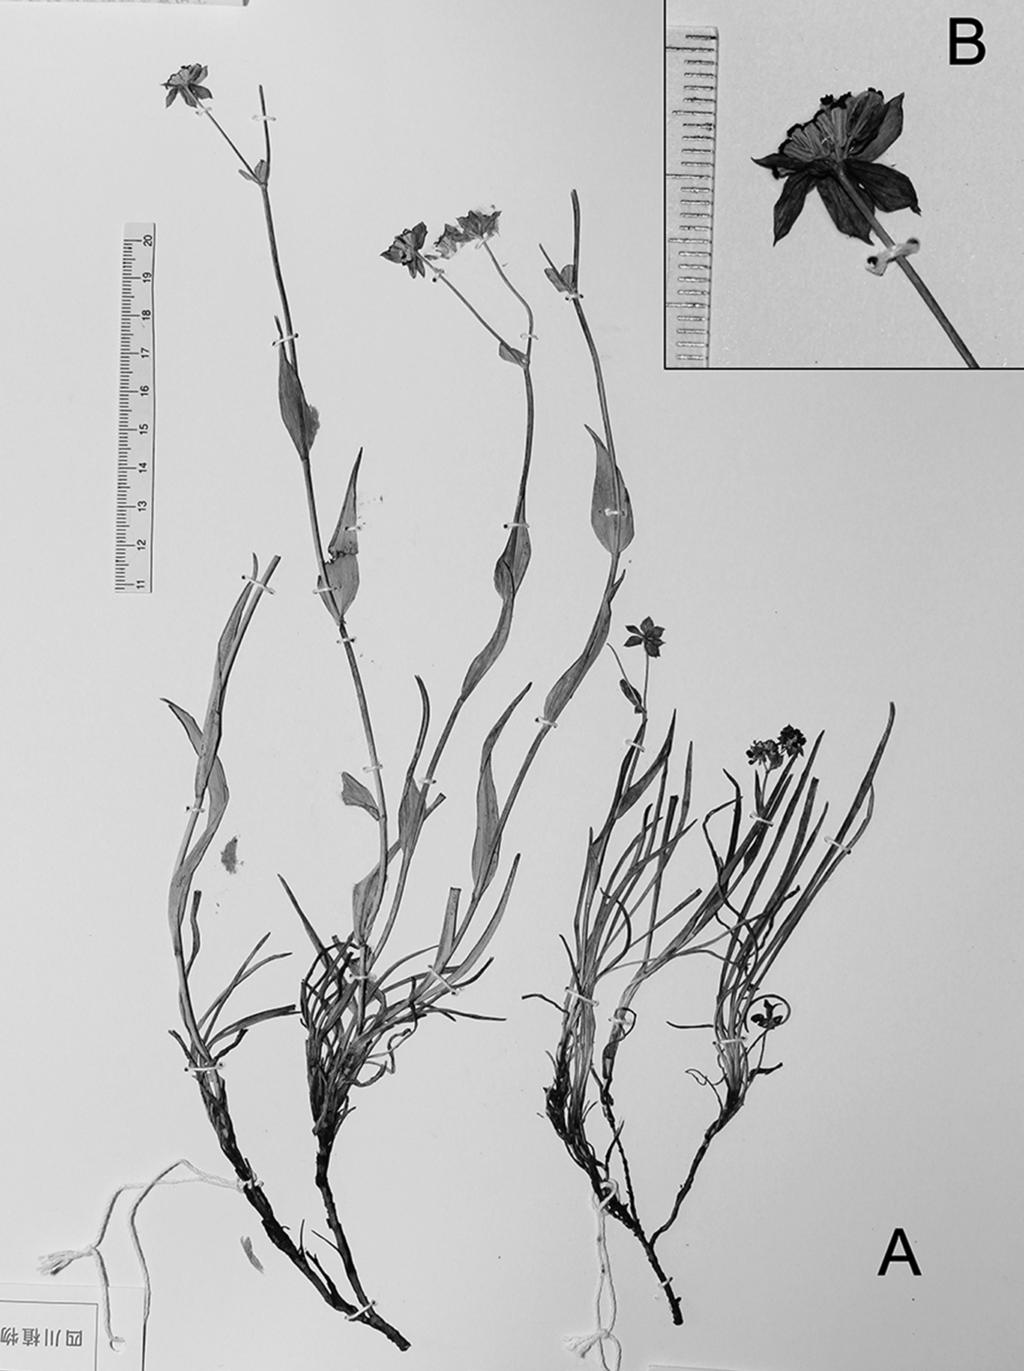 382 Ma et al. Ann. BOT. Fennici Vol. 50 Fig. 3. Holotype of Bupleurum baimaense. A: Fruiting specimen. B: Inflorescence and young fruits. G. Ma m12101901 (SZ), in fruit. Paratypes: China.